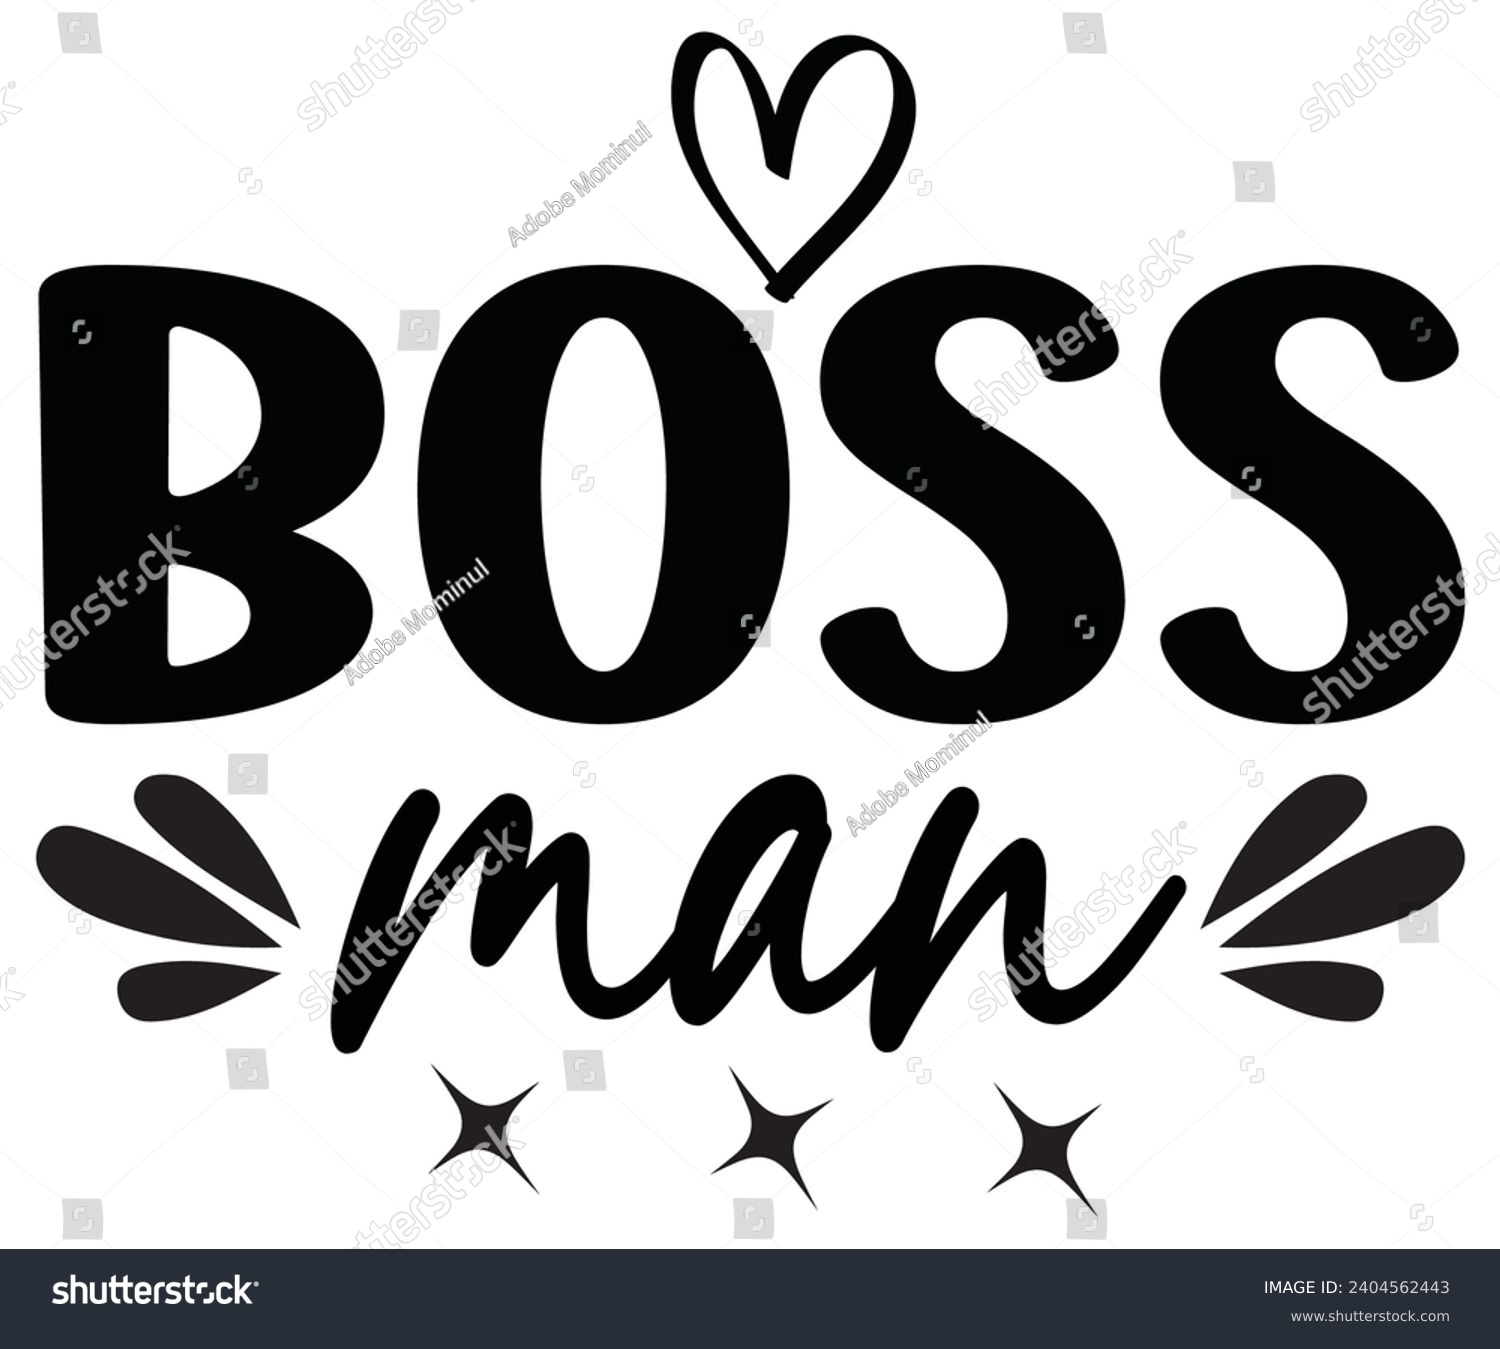 SVG of Boss Man Svg,Happy Boss Day svg,Boss Saying Quotes,Boss Day T-shirt,Gift for Boss,Great Jobs,Happy Bosses Day t-shirt,Girl Boss Shirt,Motivational Boss,Cut File,Circut And Silhouette,Commercial Use svg